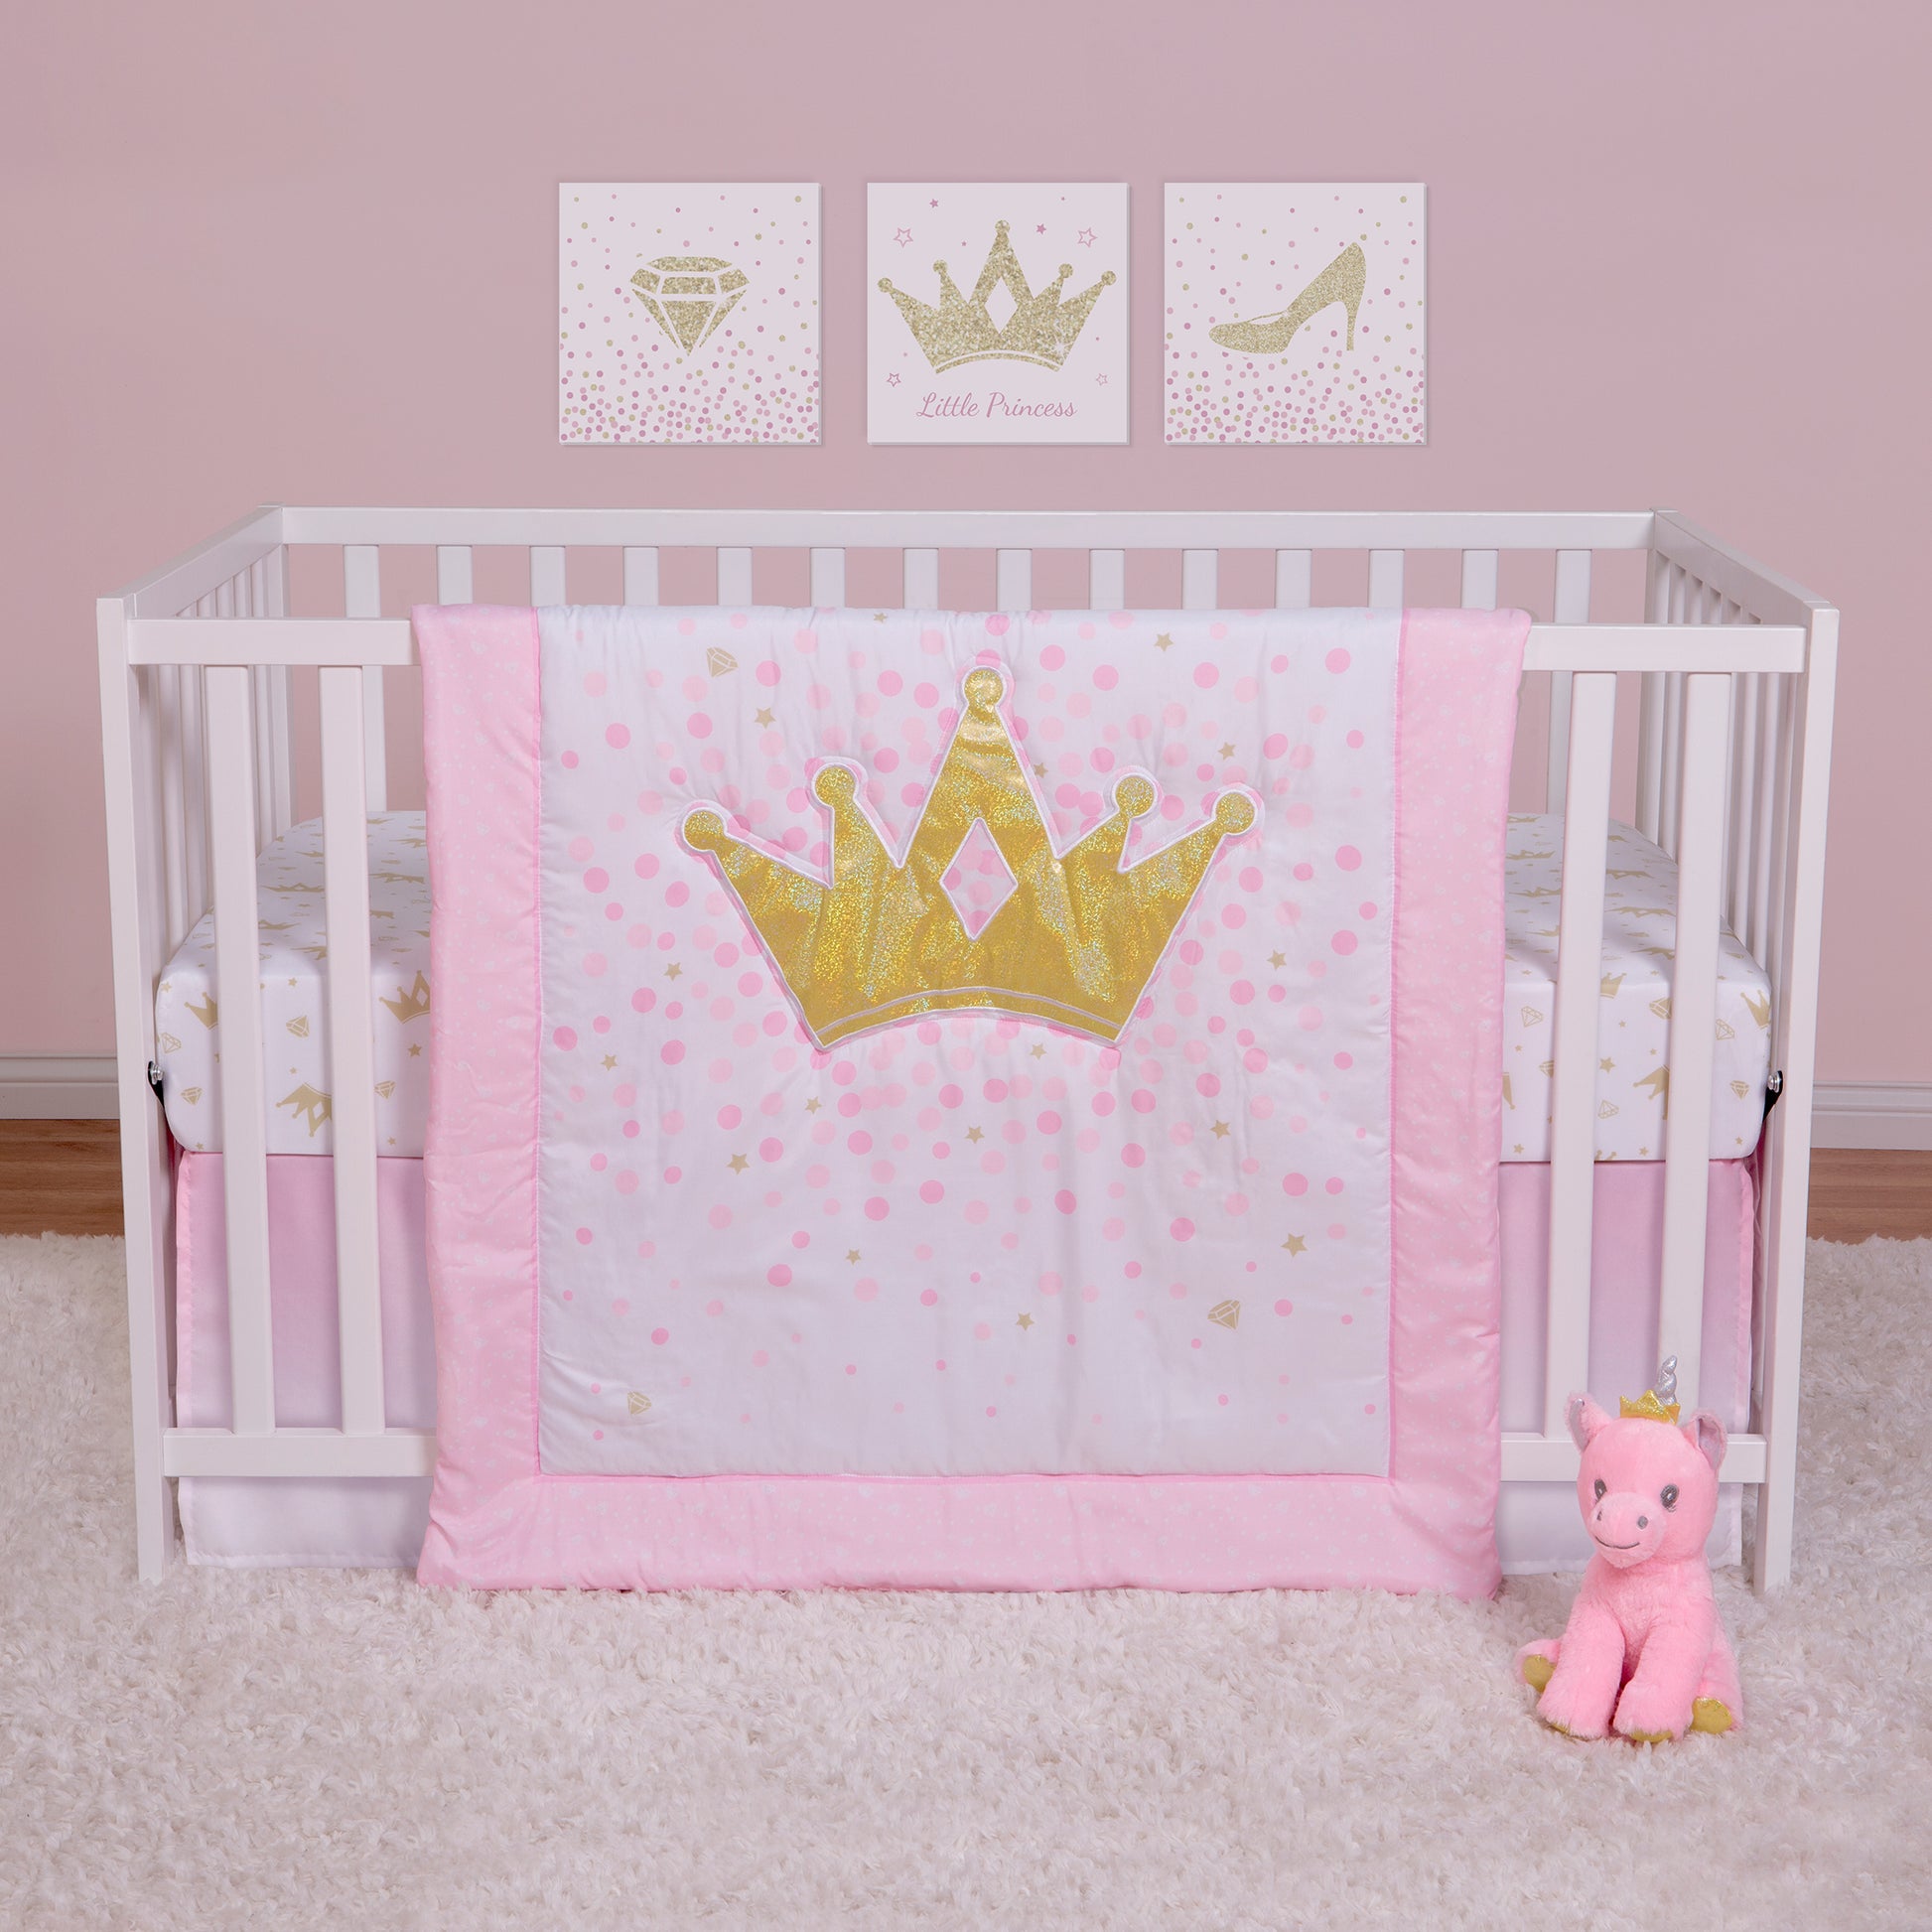 Tiara Princess 4 Piece Crib Bedding Collection by Sammy and Lou55417$69.99Trend Lab